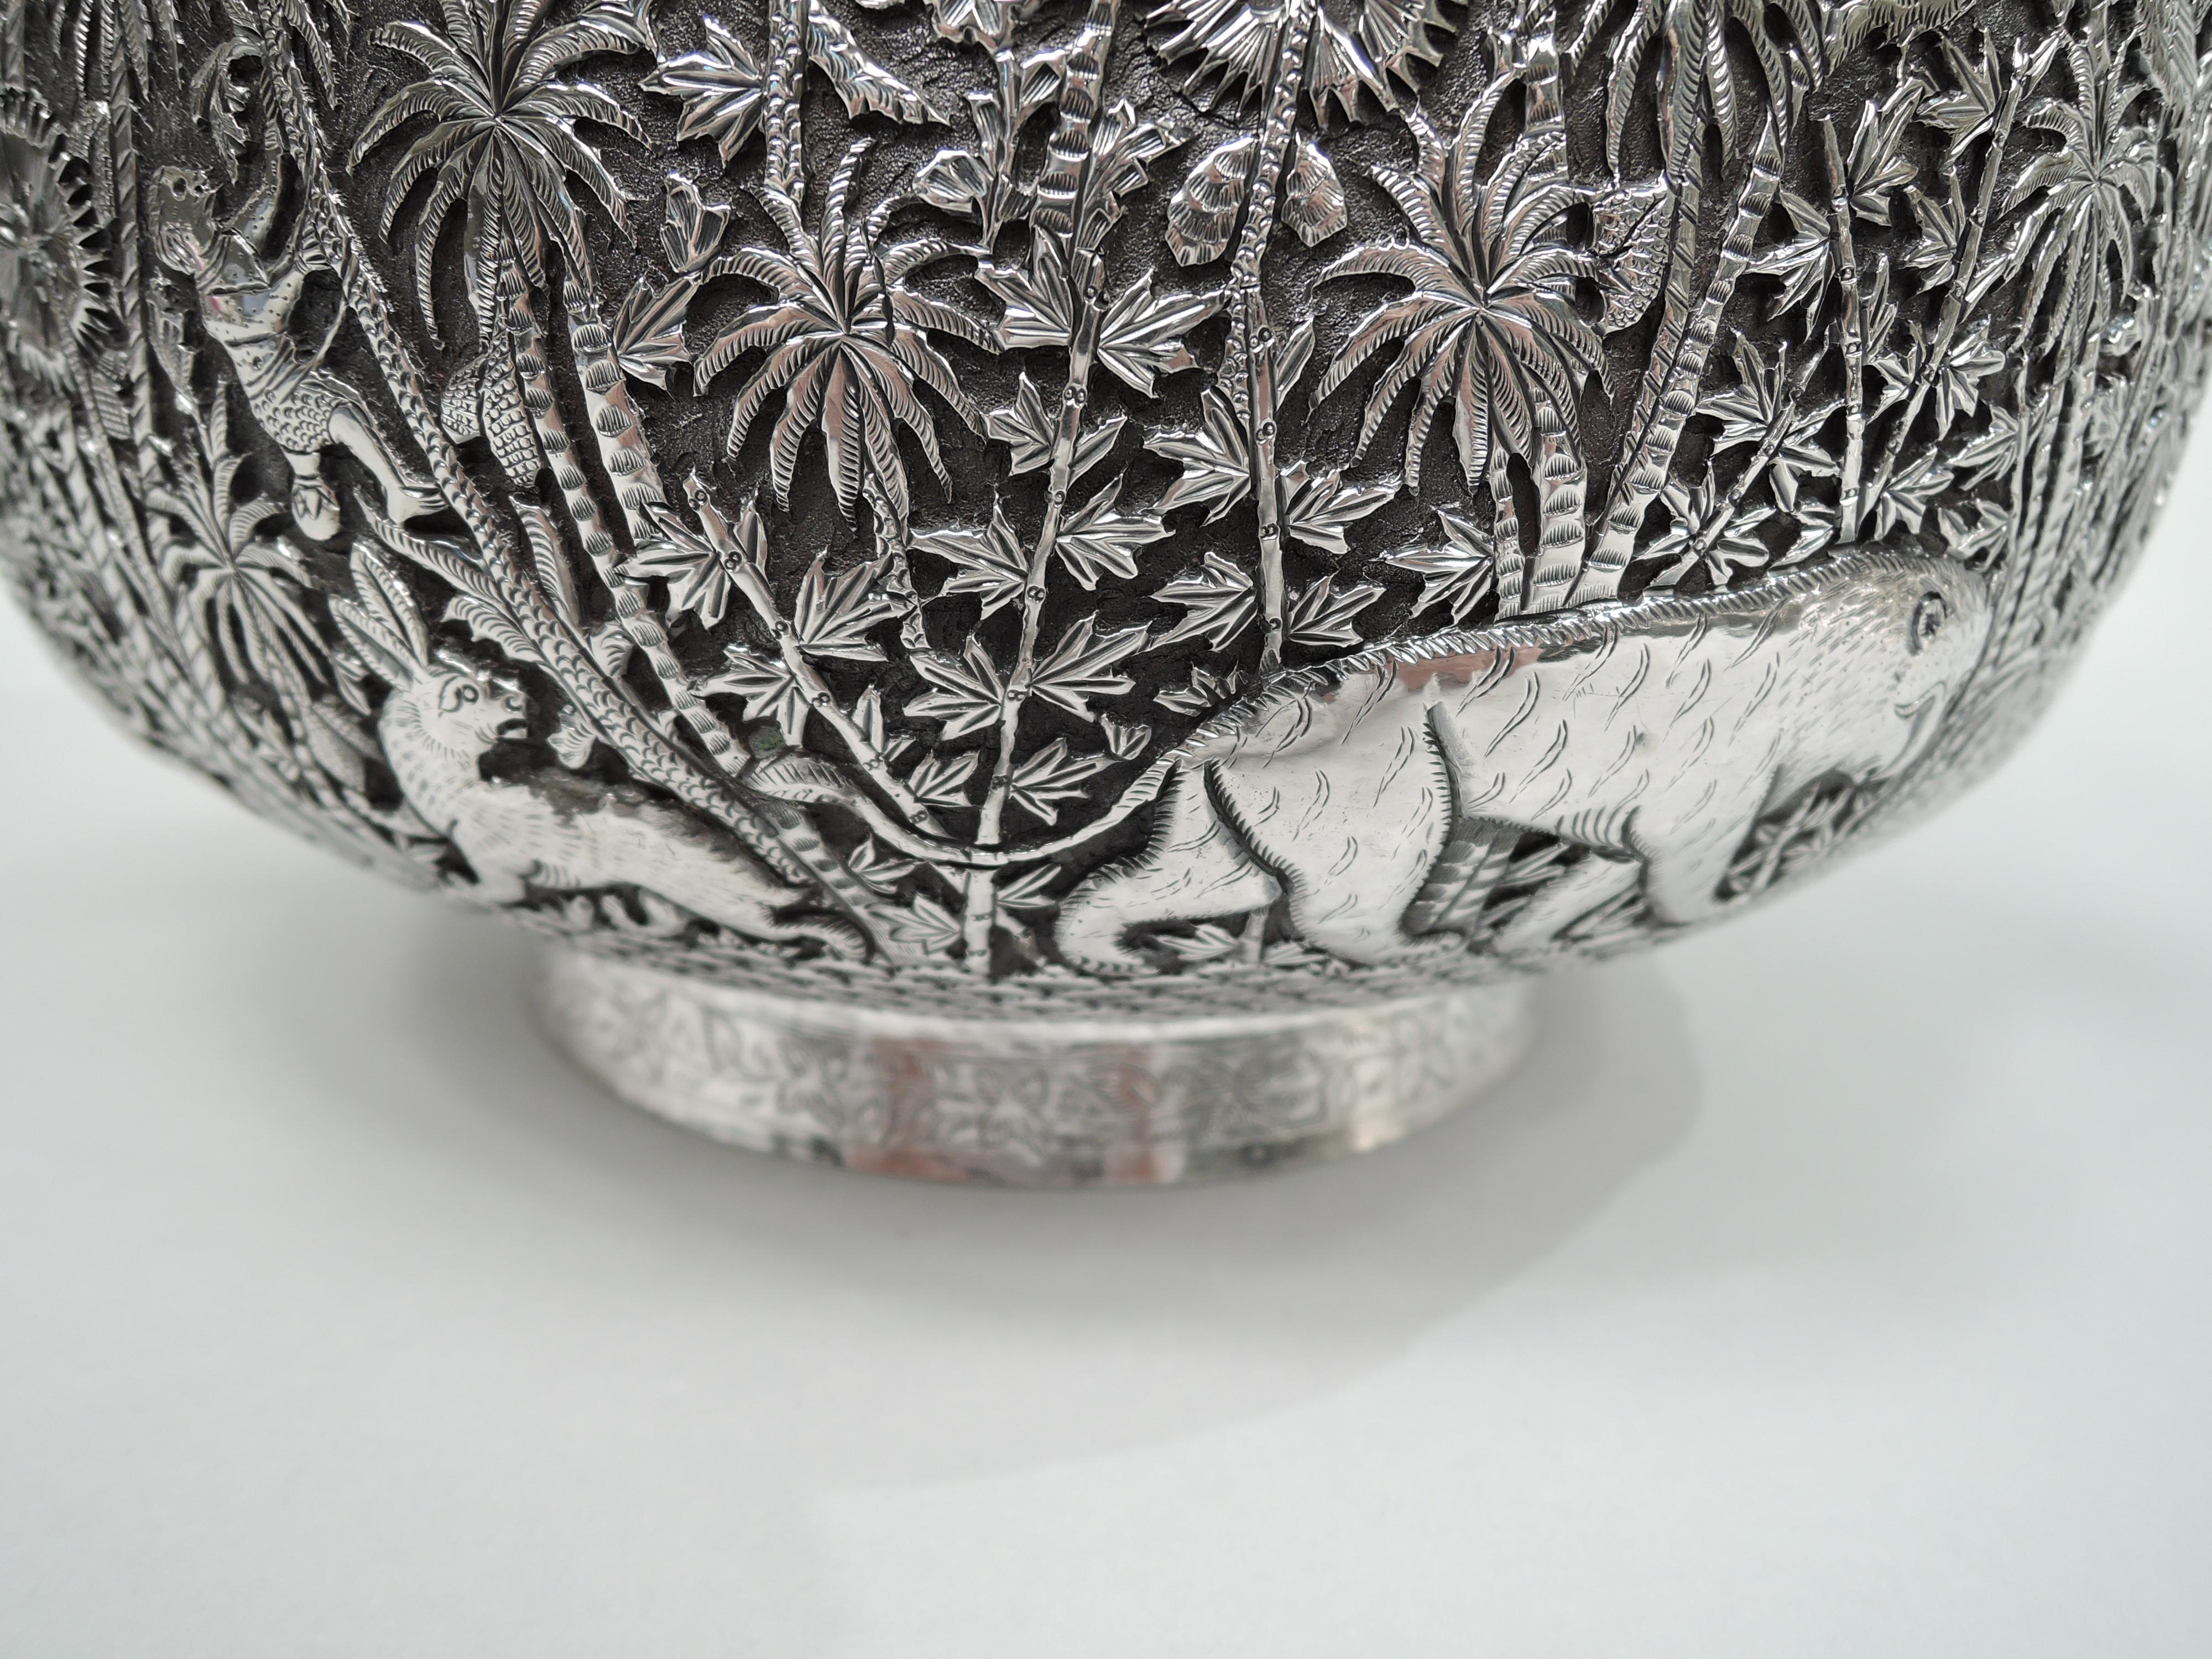 Indian Colonial Lucknow Silver Bowl with Chicago Golf Club Association 1